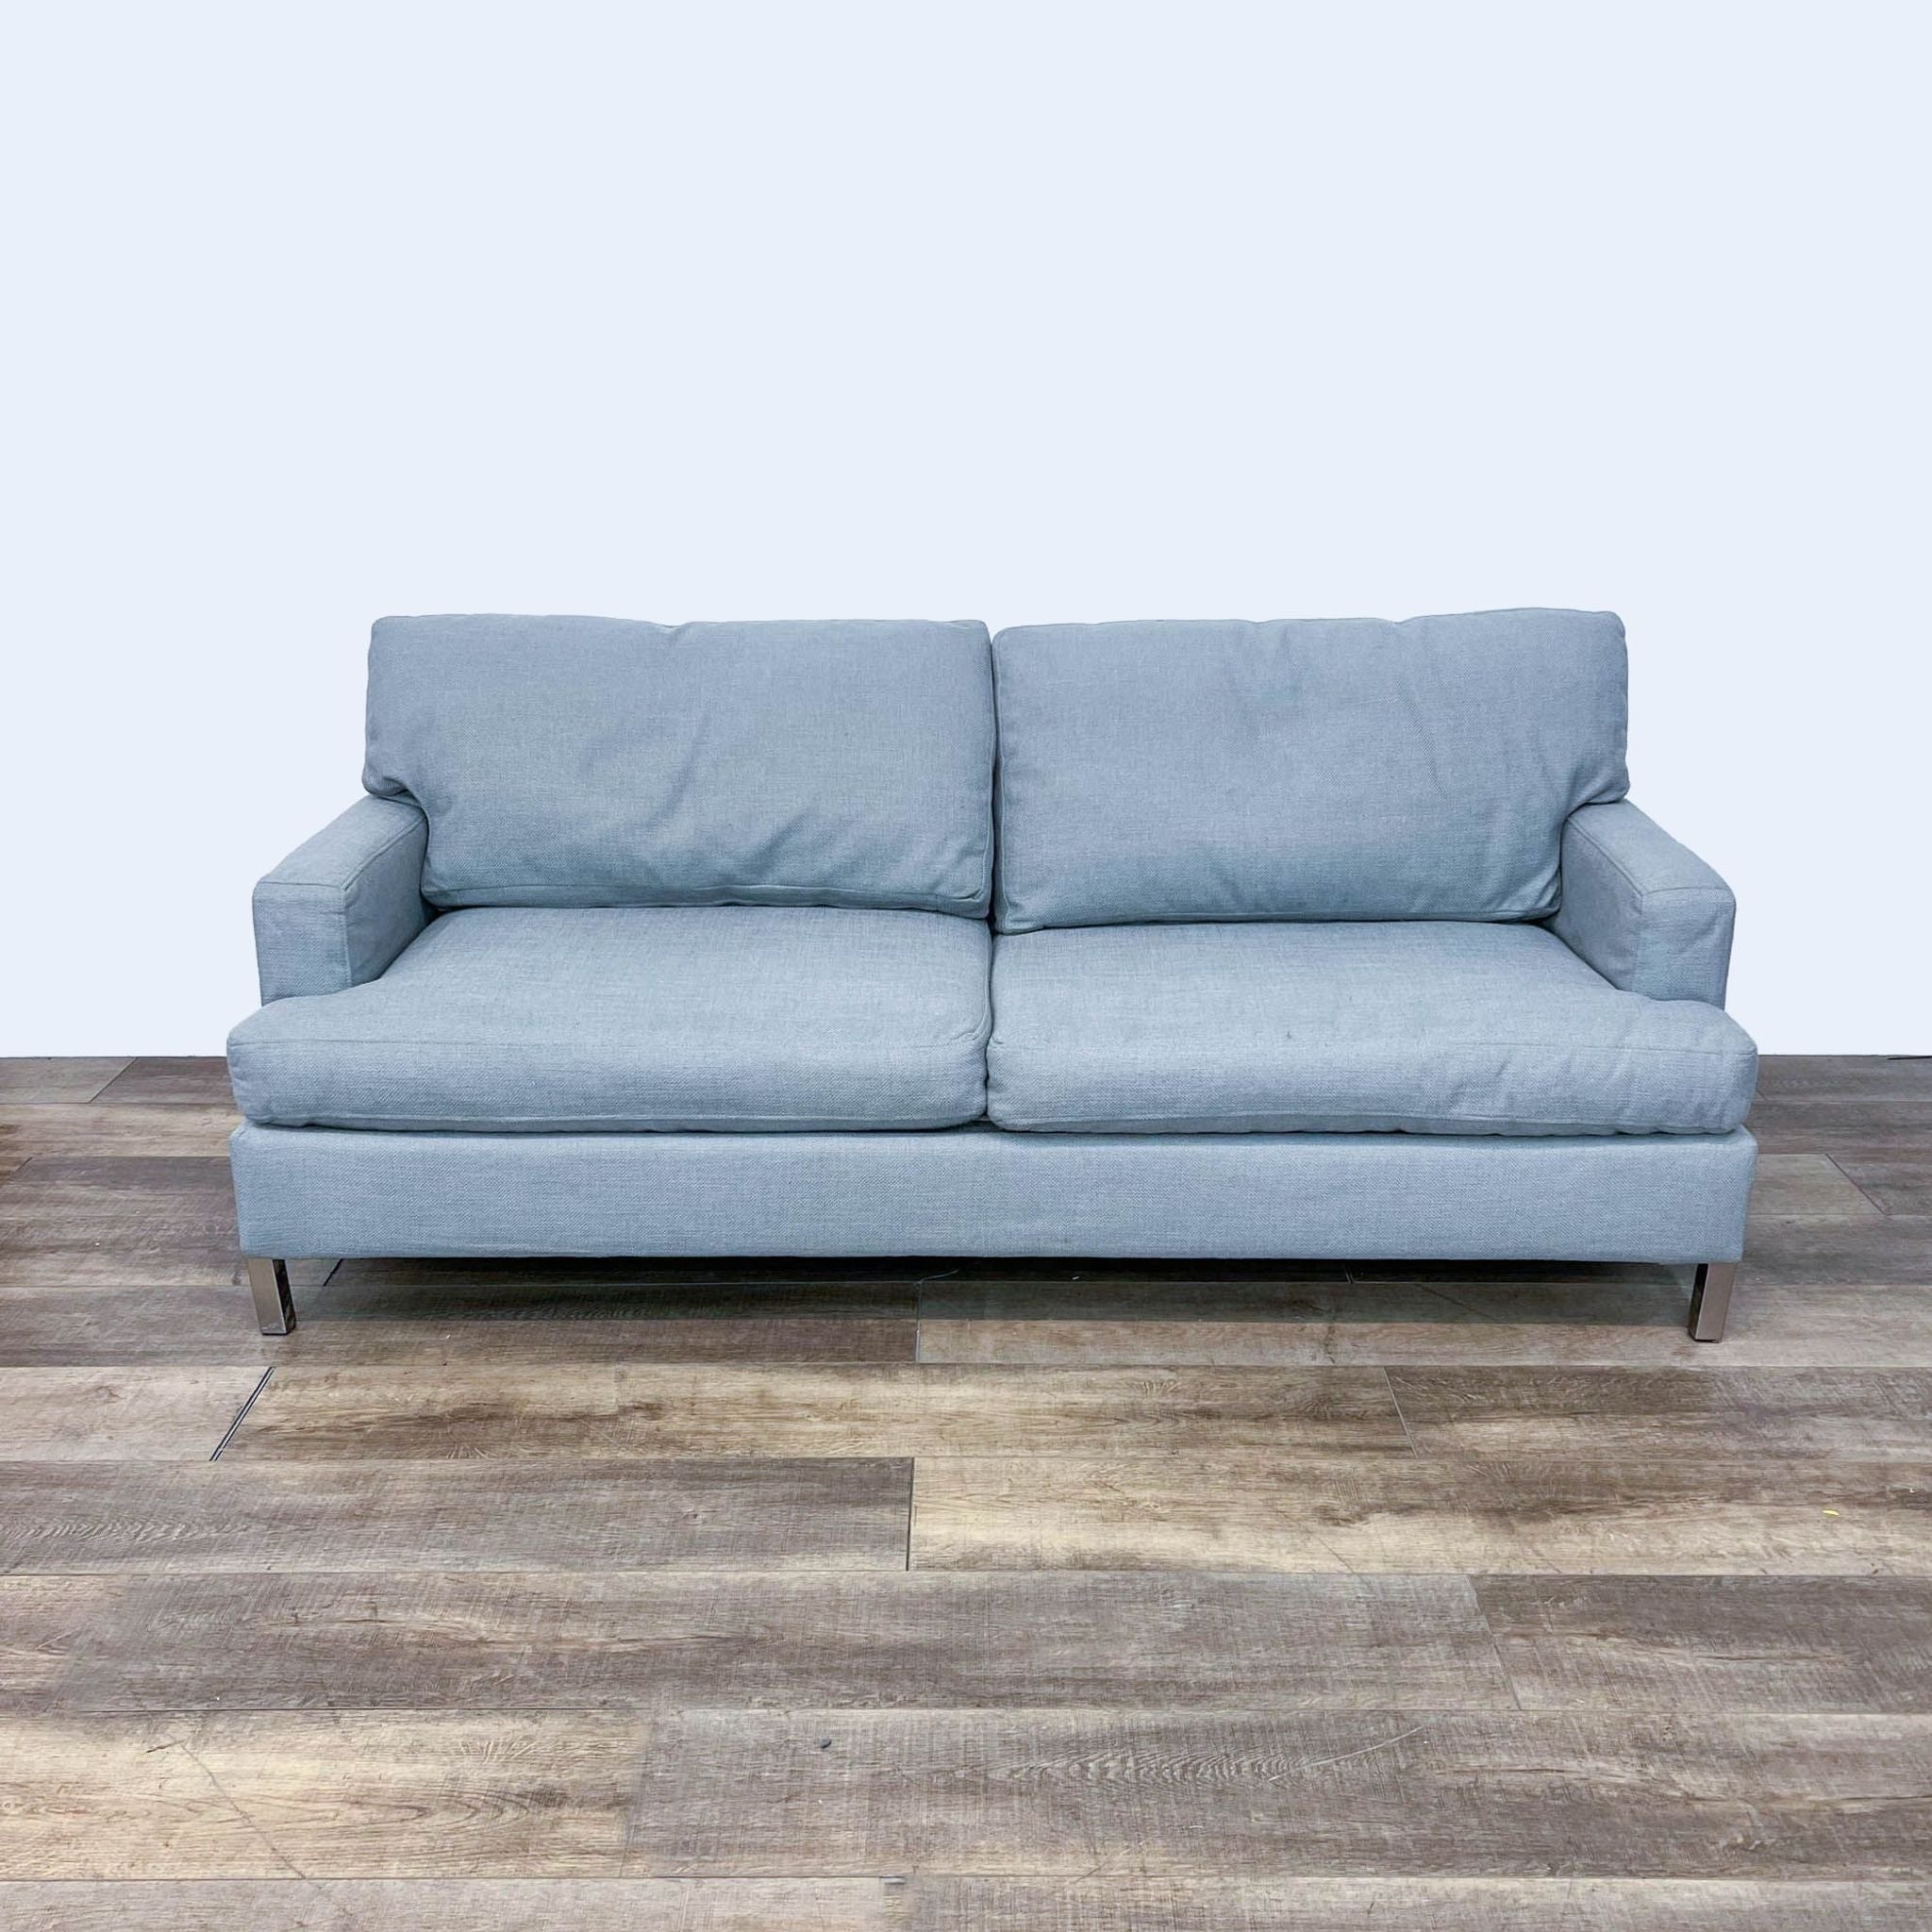 Gray 3-seat sofa with T-back cushions and track arms, nickel legs, by Better by Design.